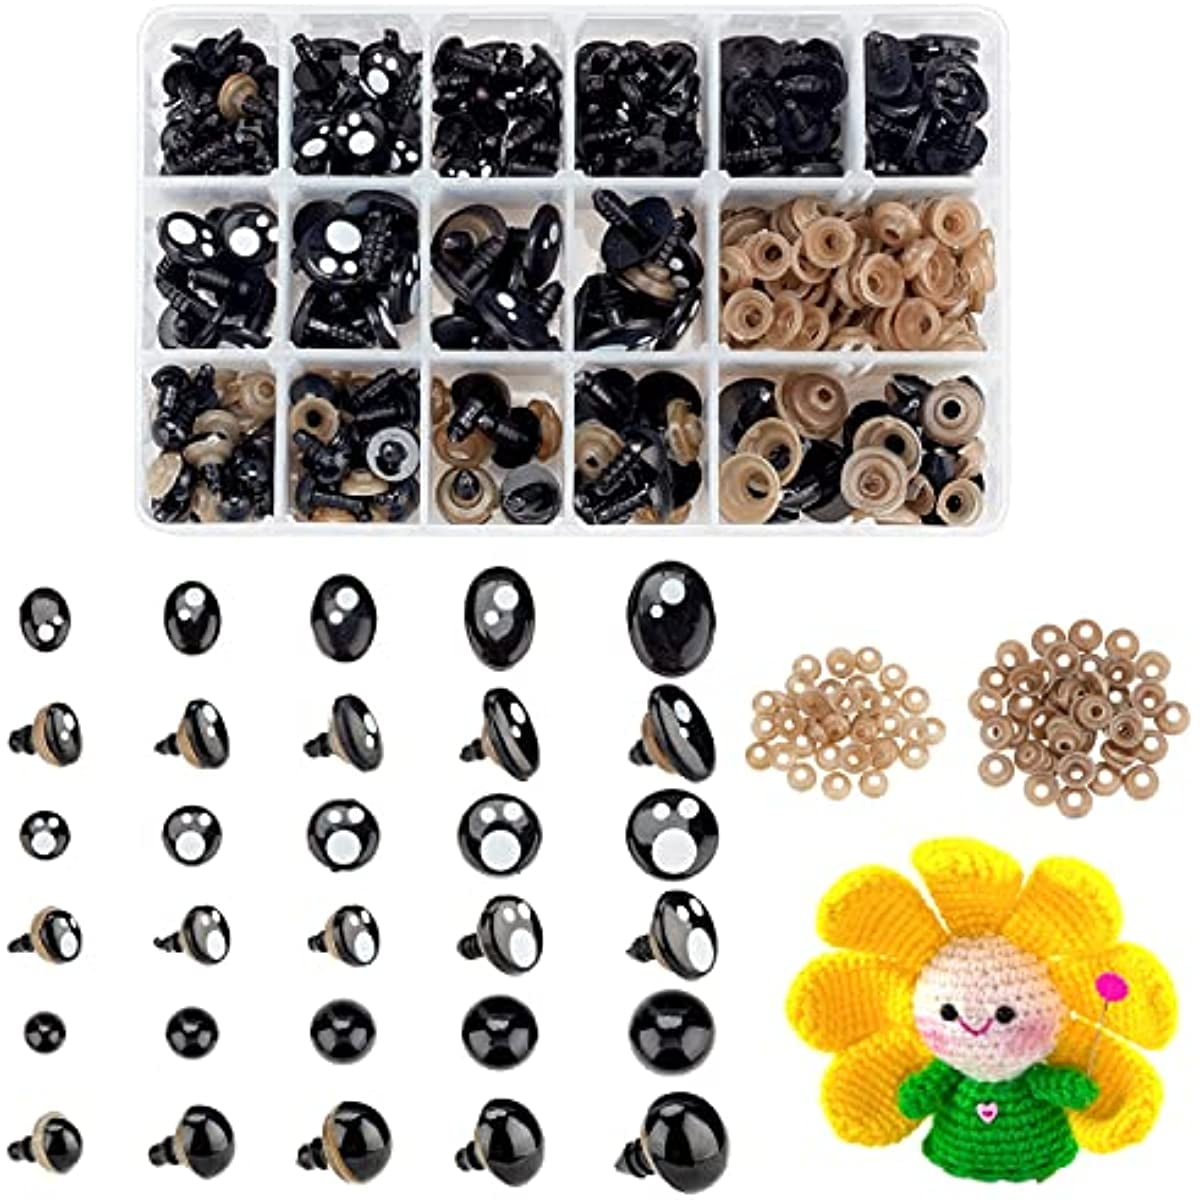 12mm Kawaii Style Round Safety Eyes and Washers: 3 Pairs - Doll / Amigurumi  / Animal / Stuffed Creations / Crochet / Knit / Craft Supplies